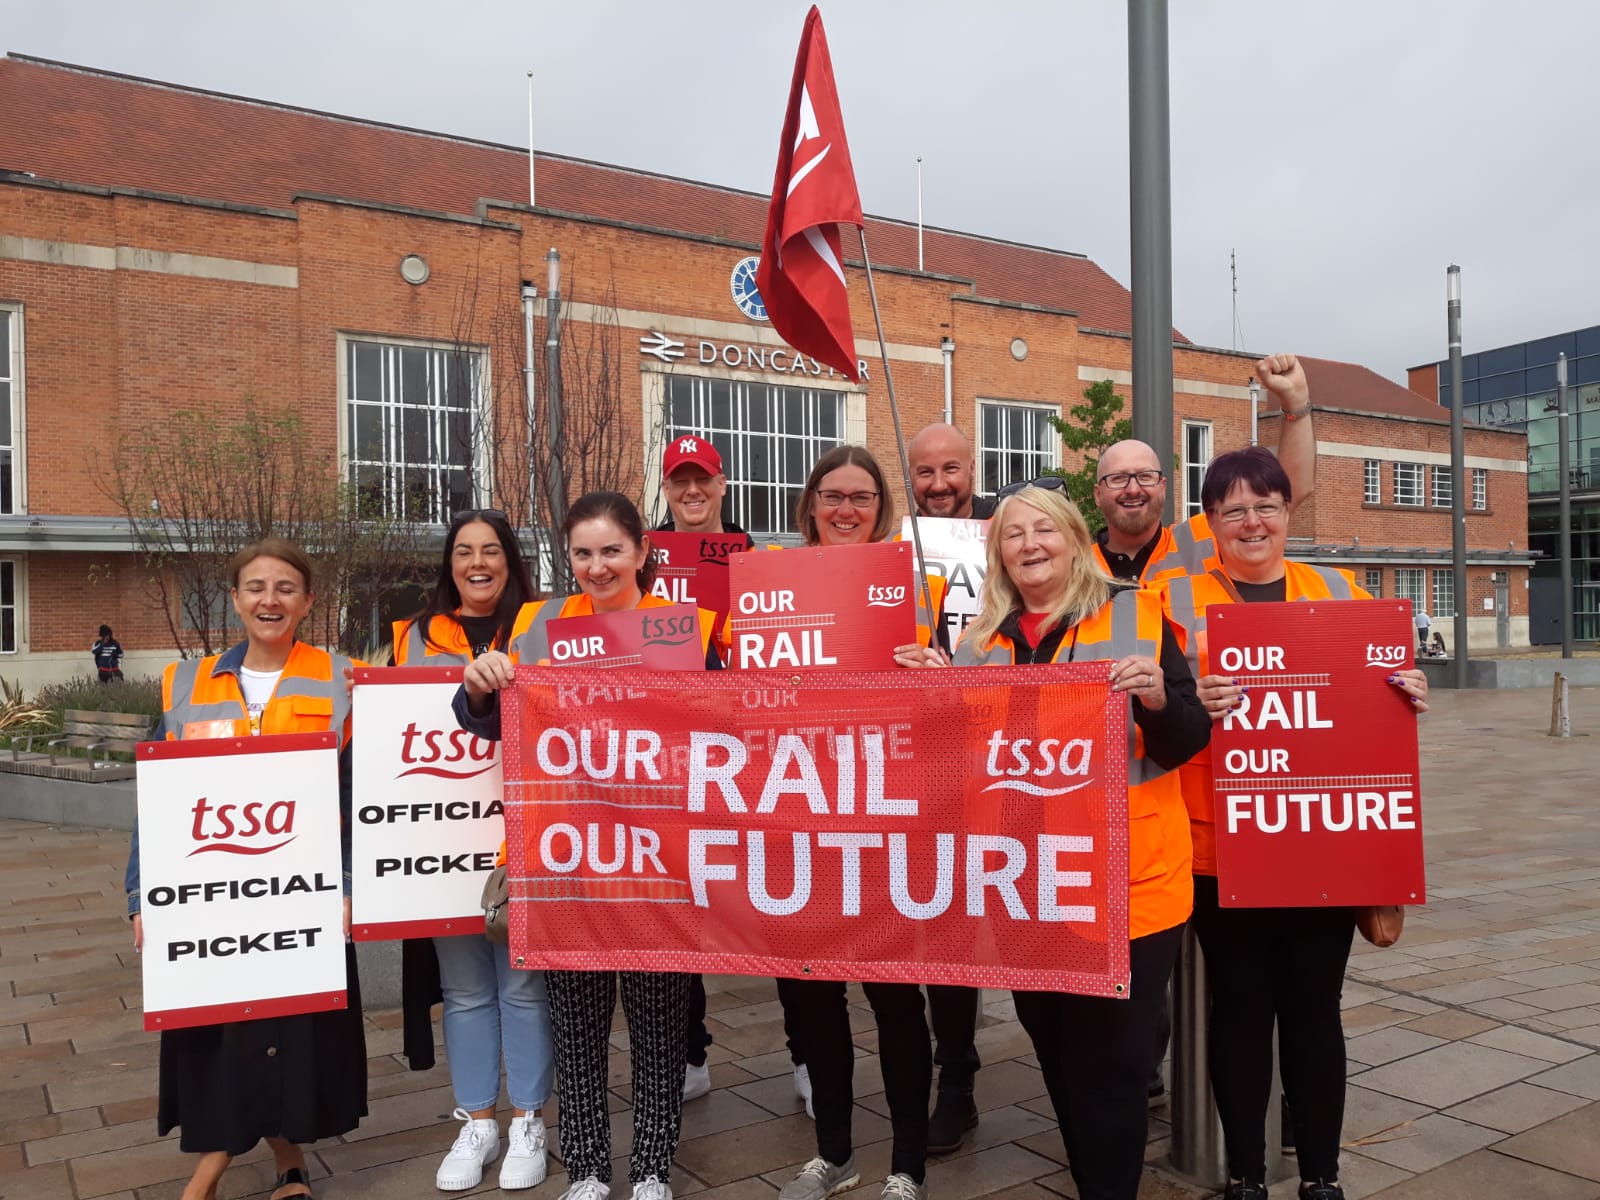 Image shows TSSA's Andi Fox and several TSSA members, men and women, in orange hi-visibility jackets smiling on a picket line in Doncaster